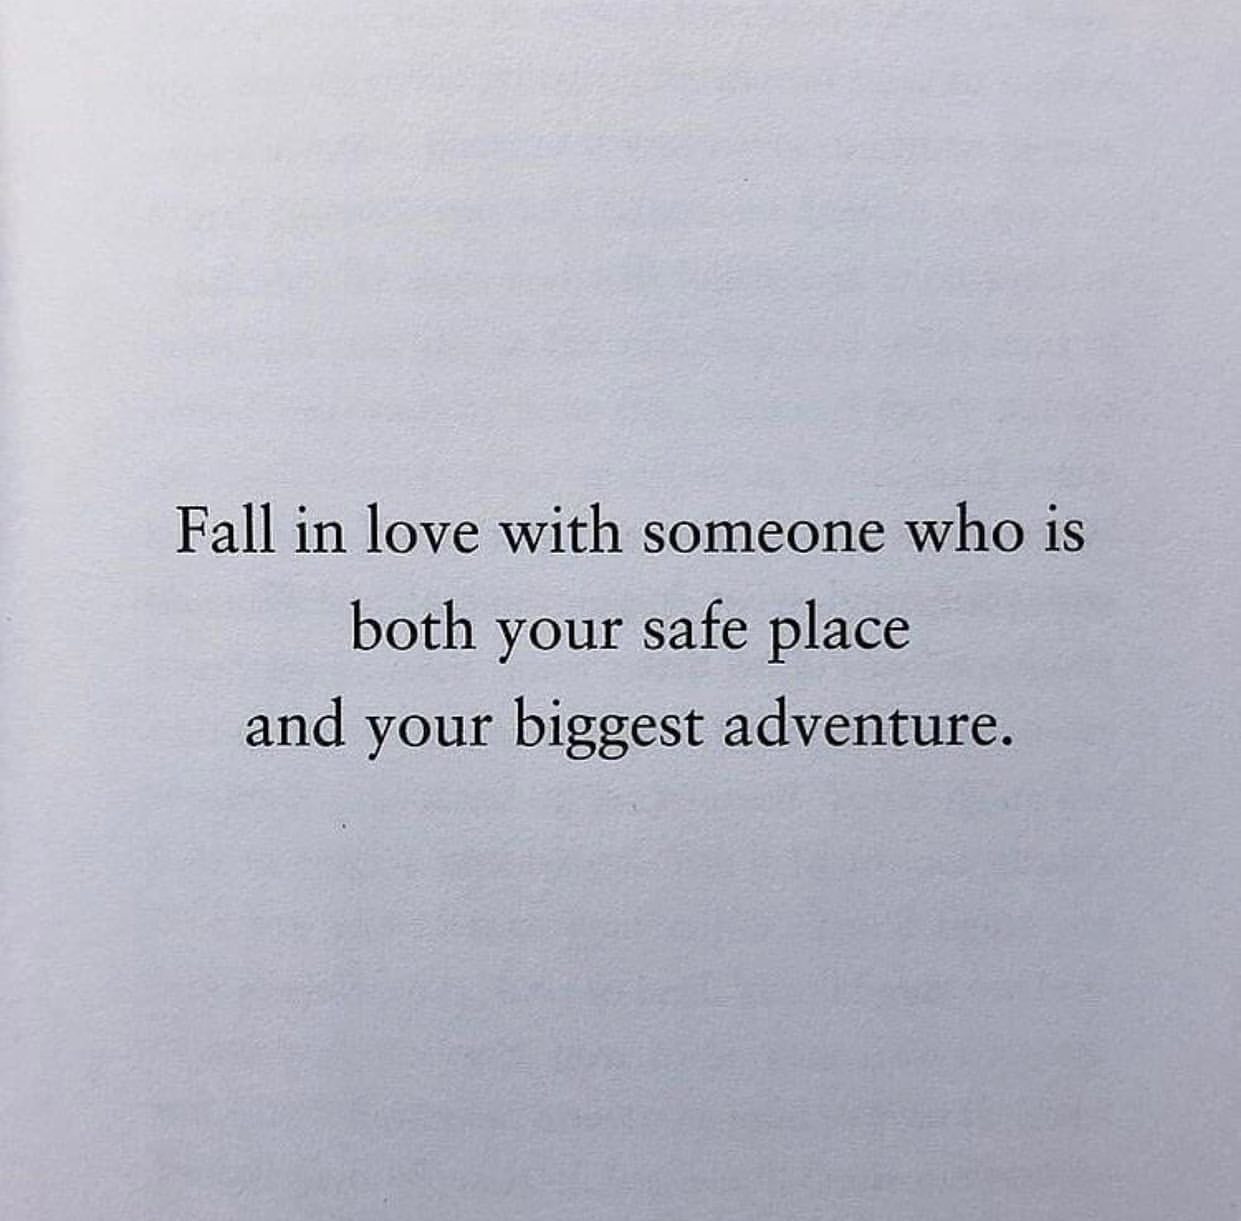 Fall in love with someone who is both your safe place and your biggest adventure.